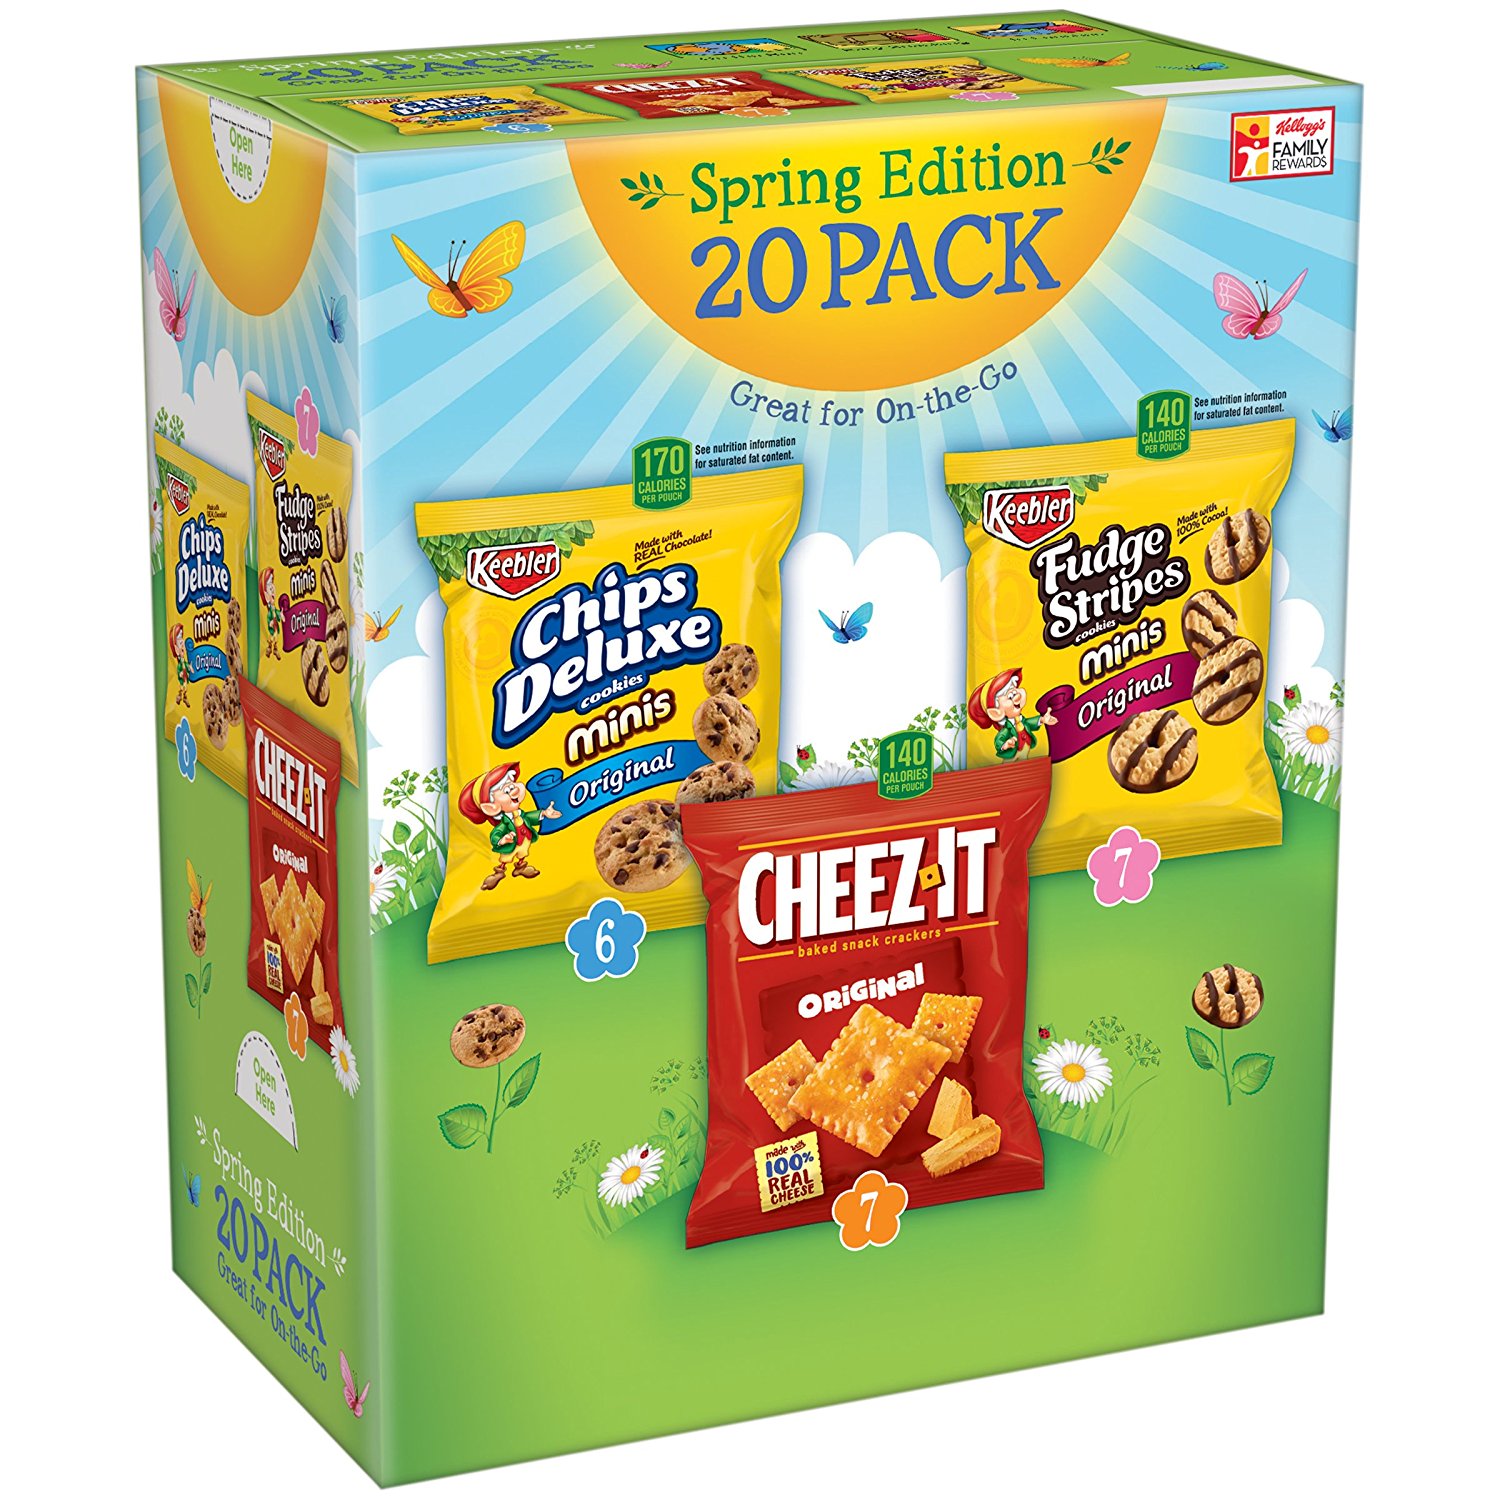 Keebler Cookie and Cheez-It Variety Pack 20 Count Only $6.38 Shipped!